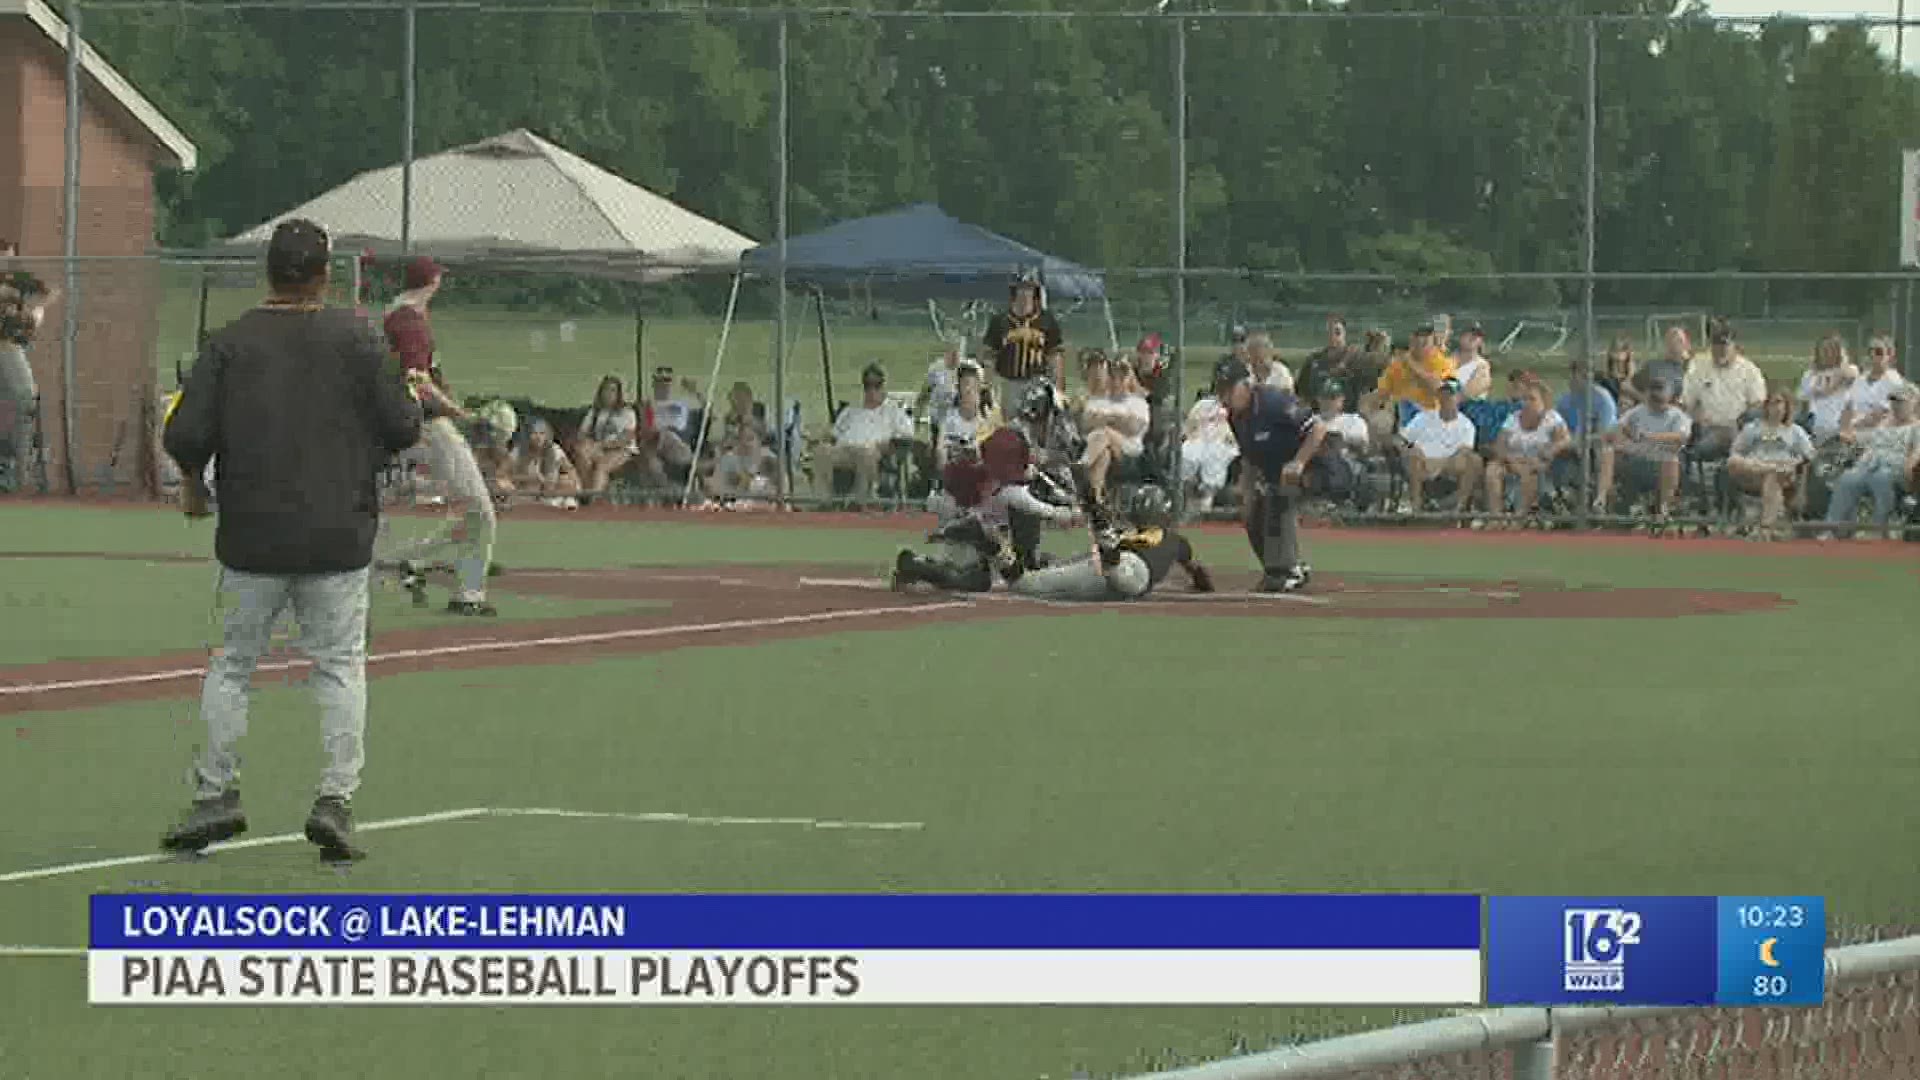 Lake-Lehman scored five runs in the 7th to rally past Loyalsock 13-12 in the State 'AAA' baseball playoffs.